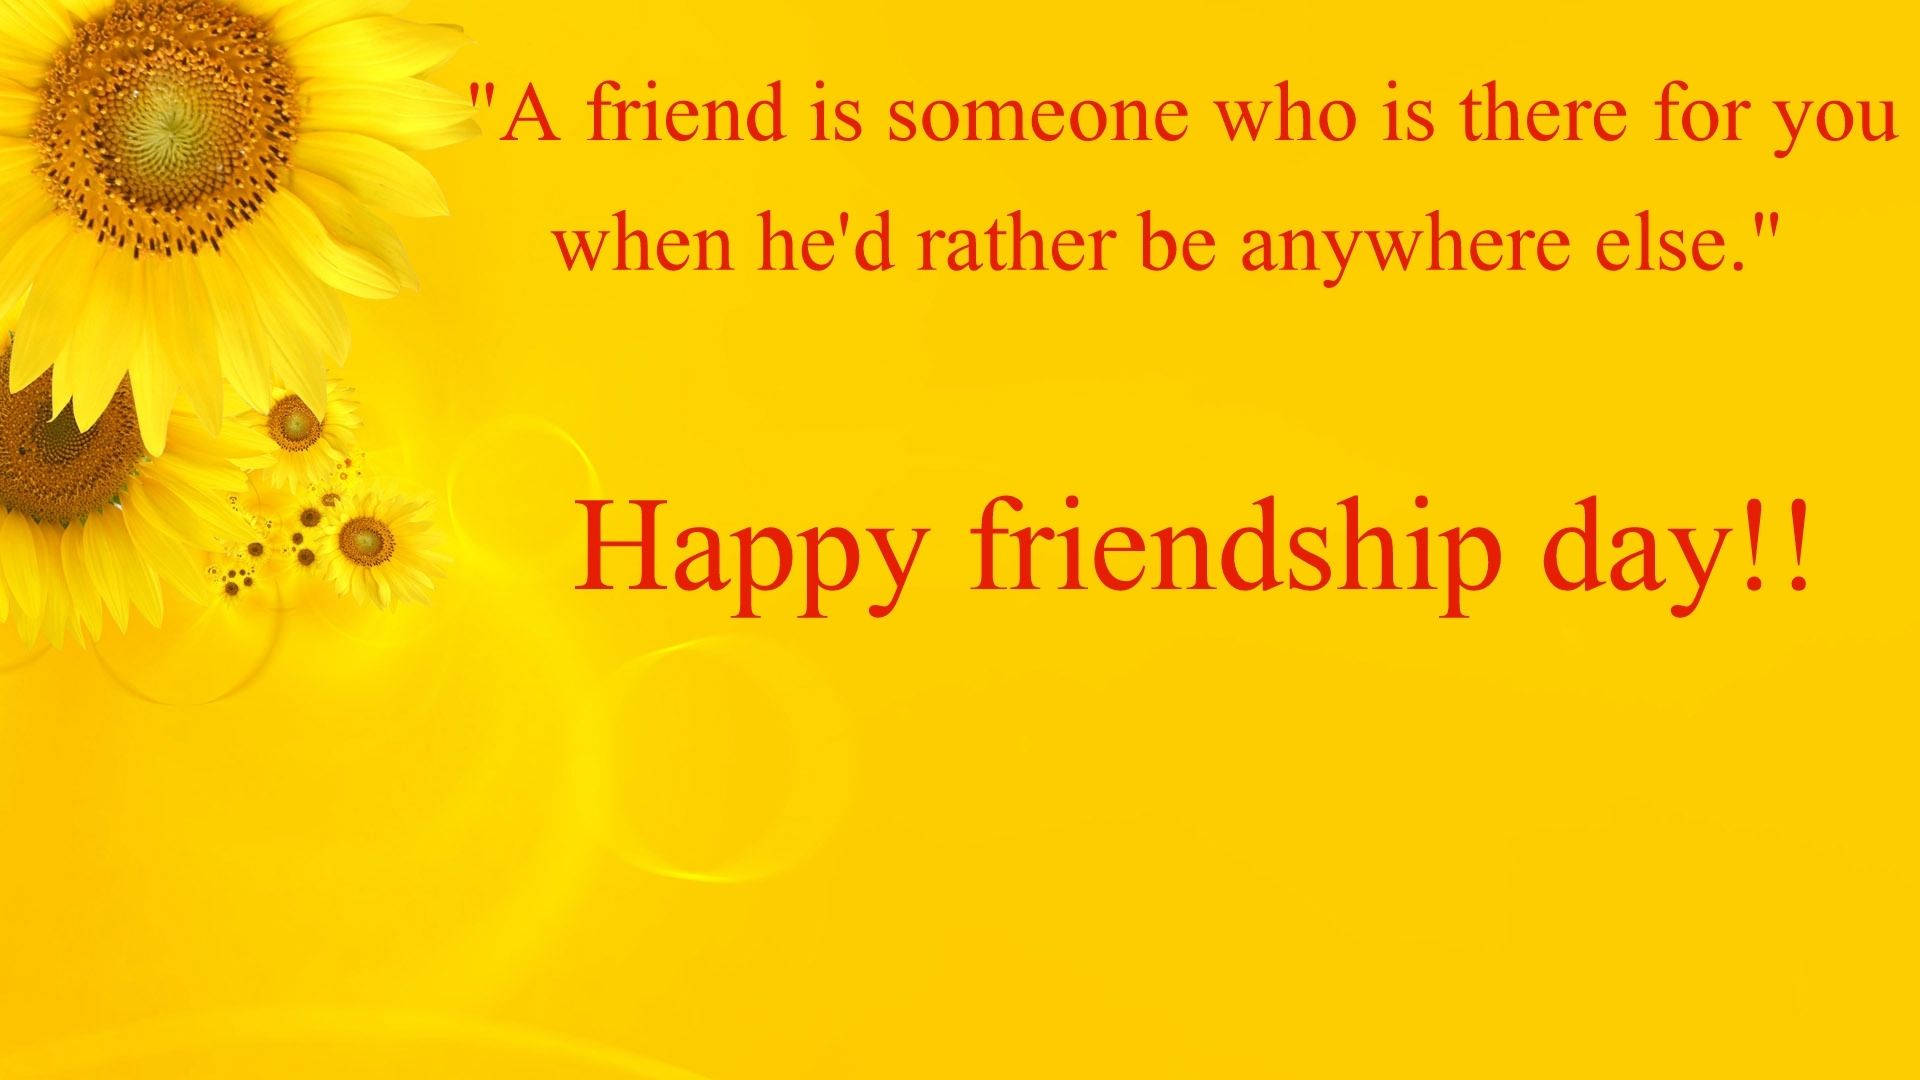 Friendship Day Quote With Sunflowers Background